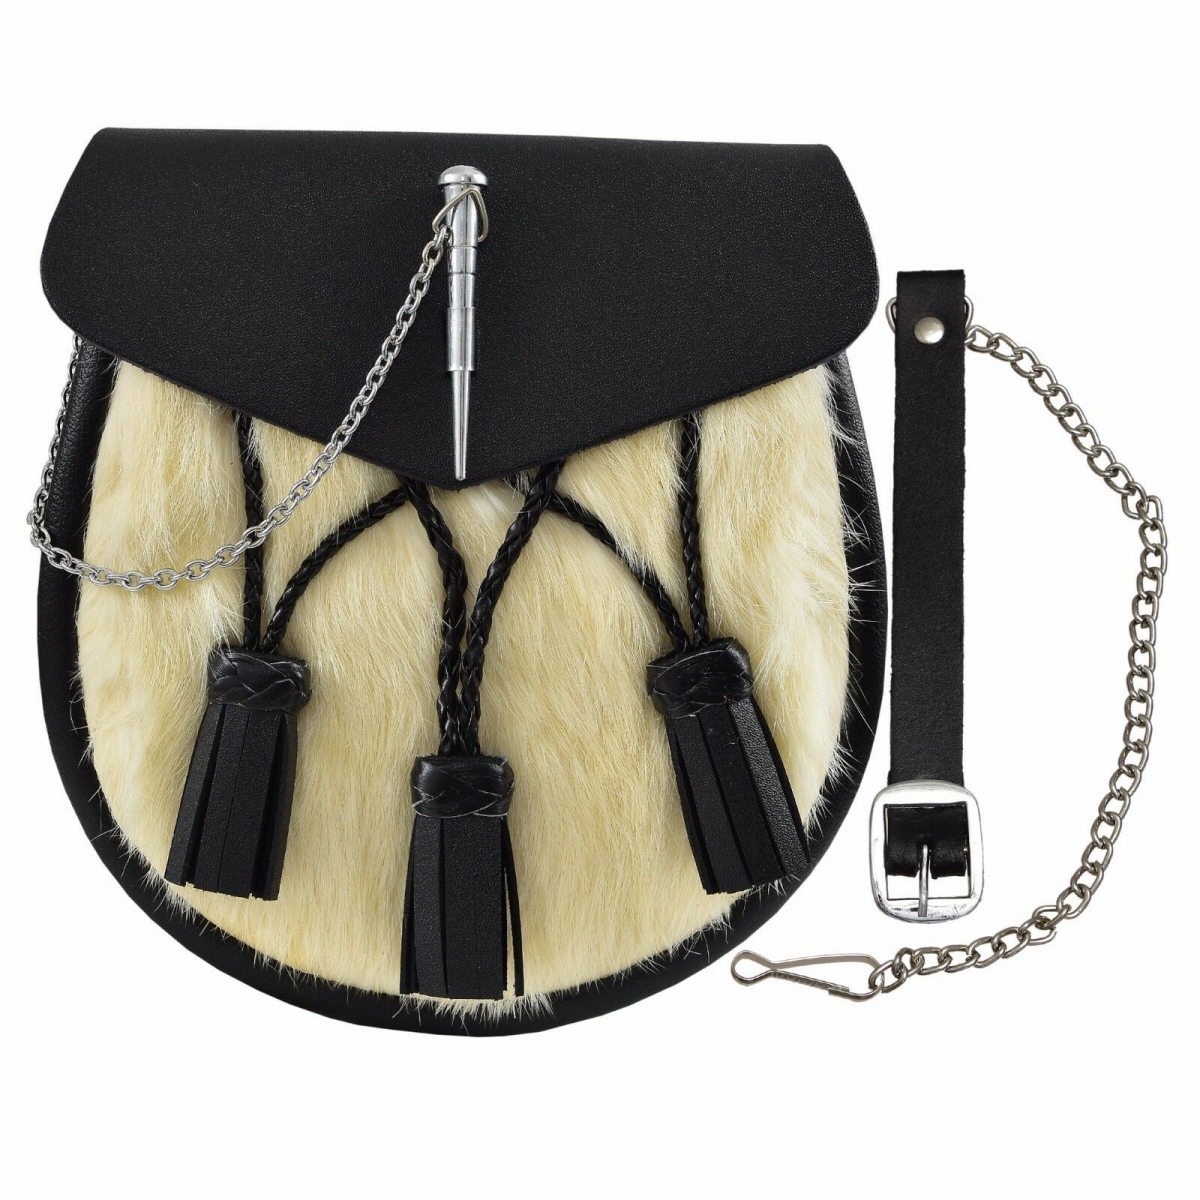 Rabbit Fur Sporran It has 3 leather tassels and a metal loop and pin closure on the flap